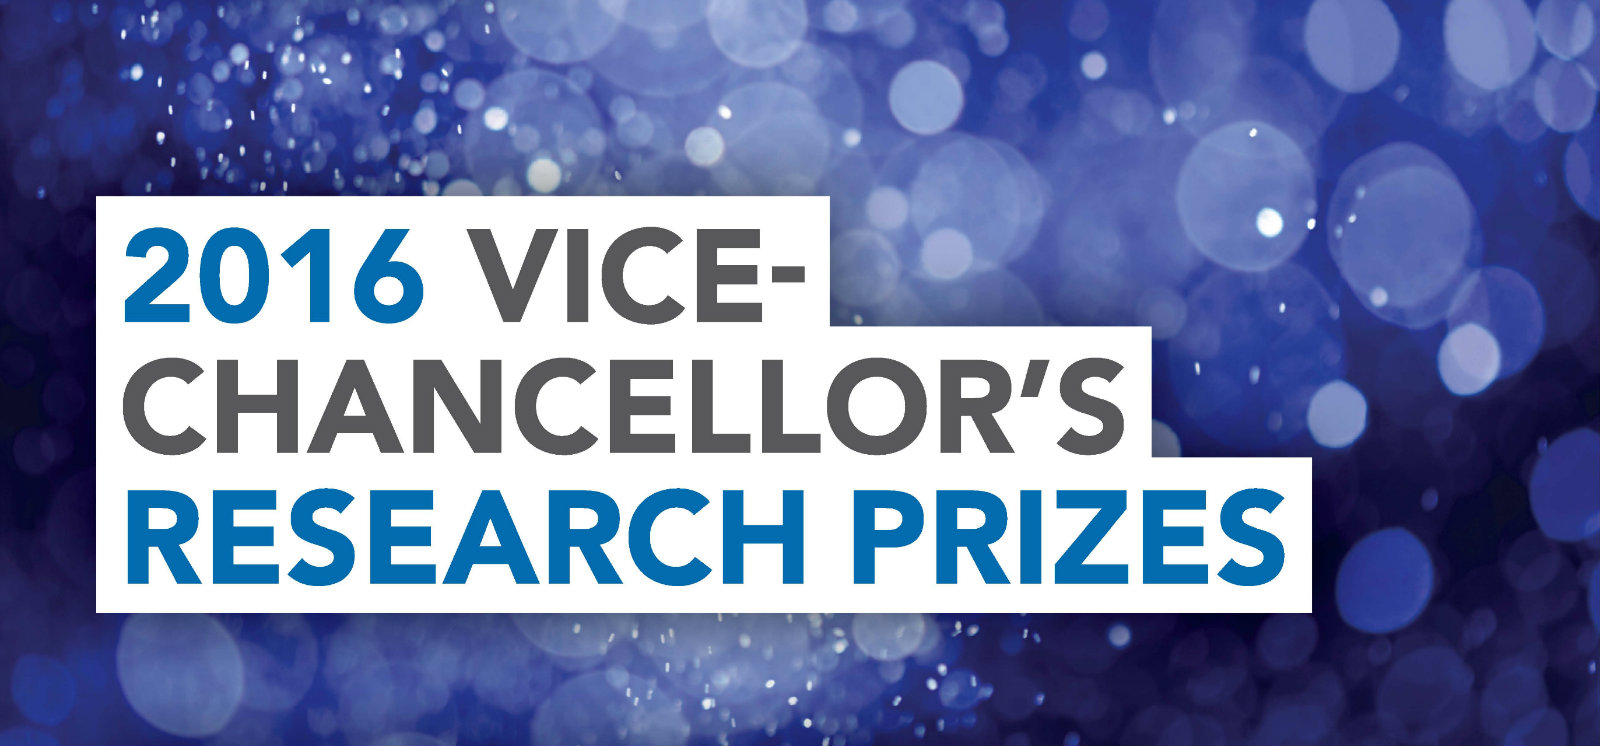 Vice Chancellor's Research Prizes 2016 - banner - 1600x747